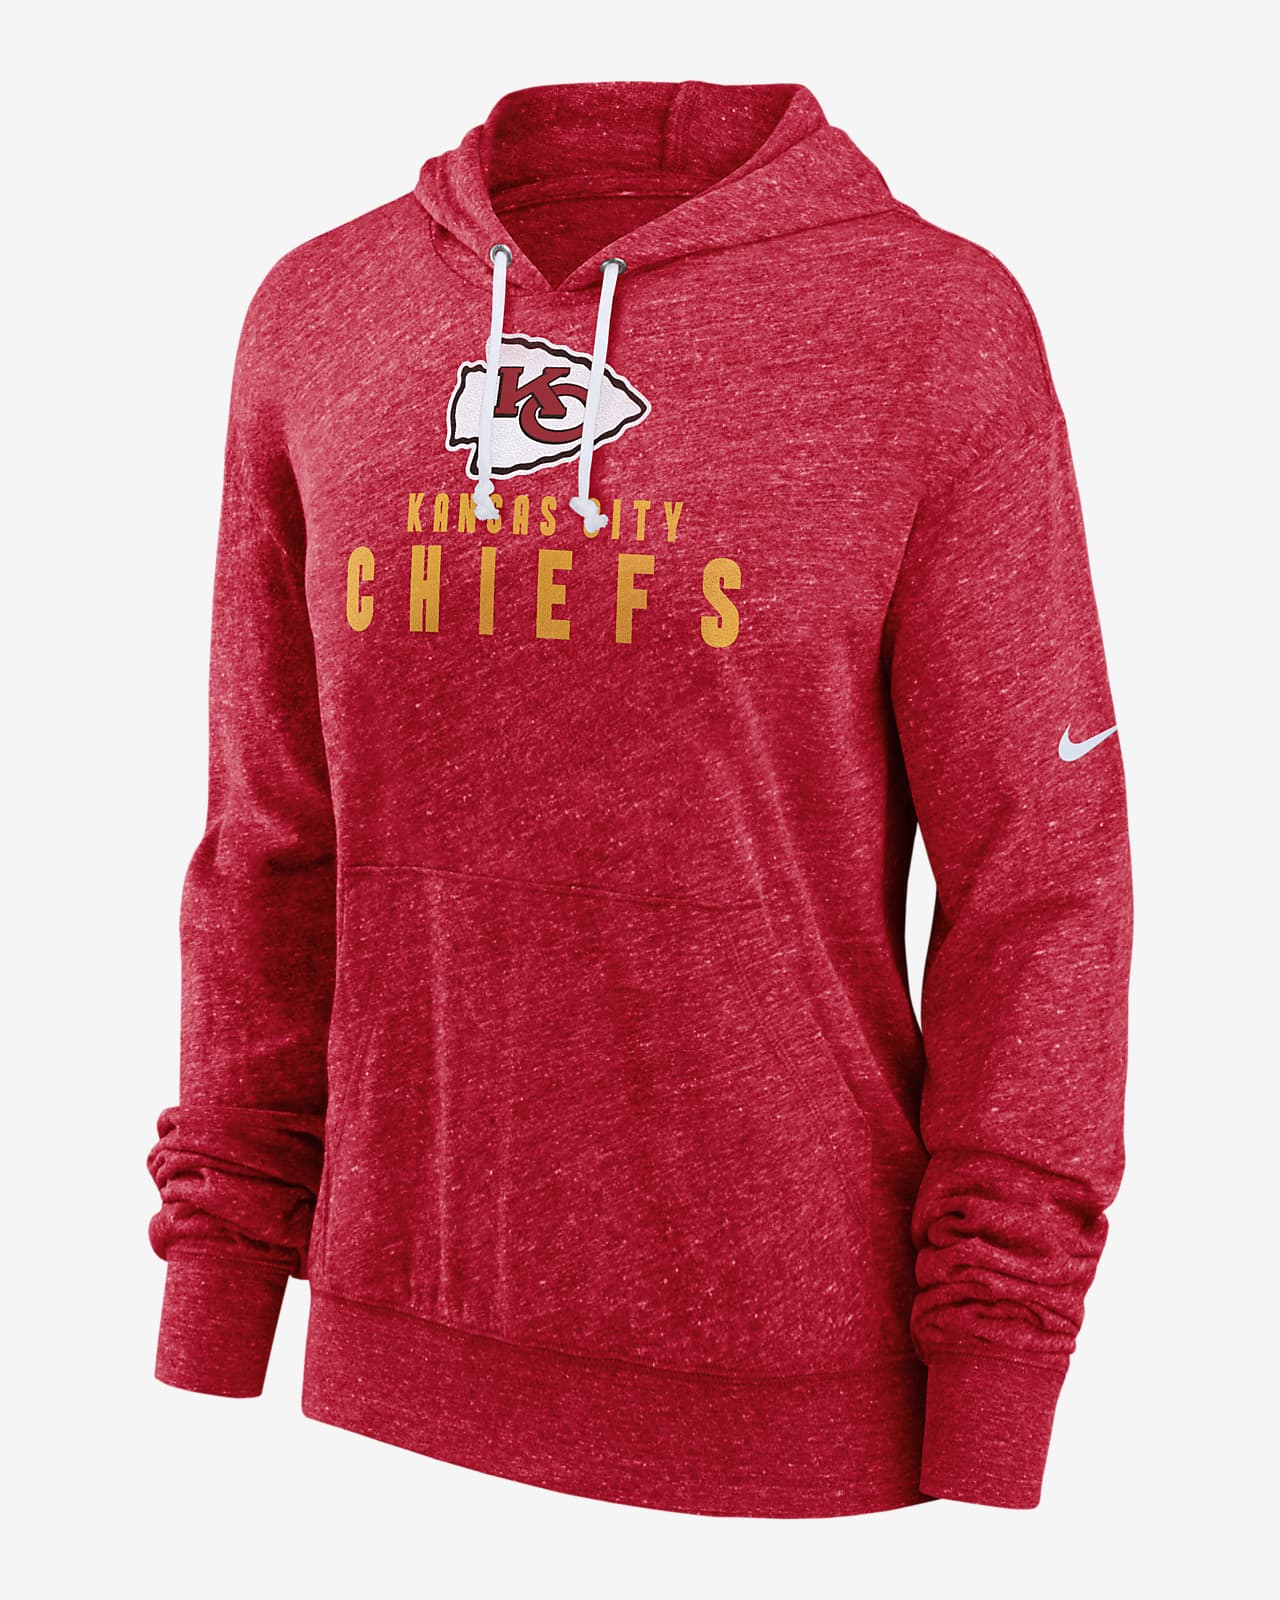 Nike Women's Gym Vintage (NFL Kansas City Chiefs) Pullover Hoodie in Red, Size: Small | NKZQ65N7G-06I